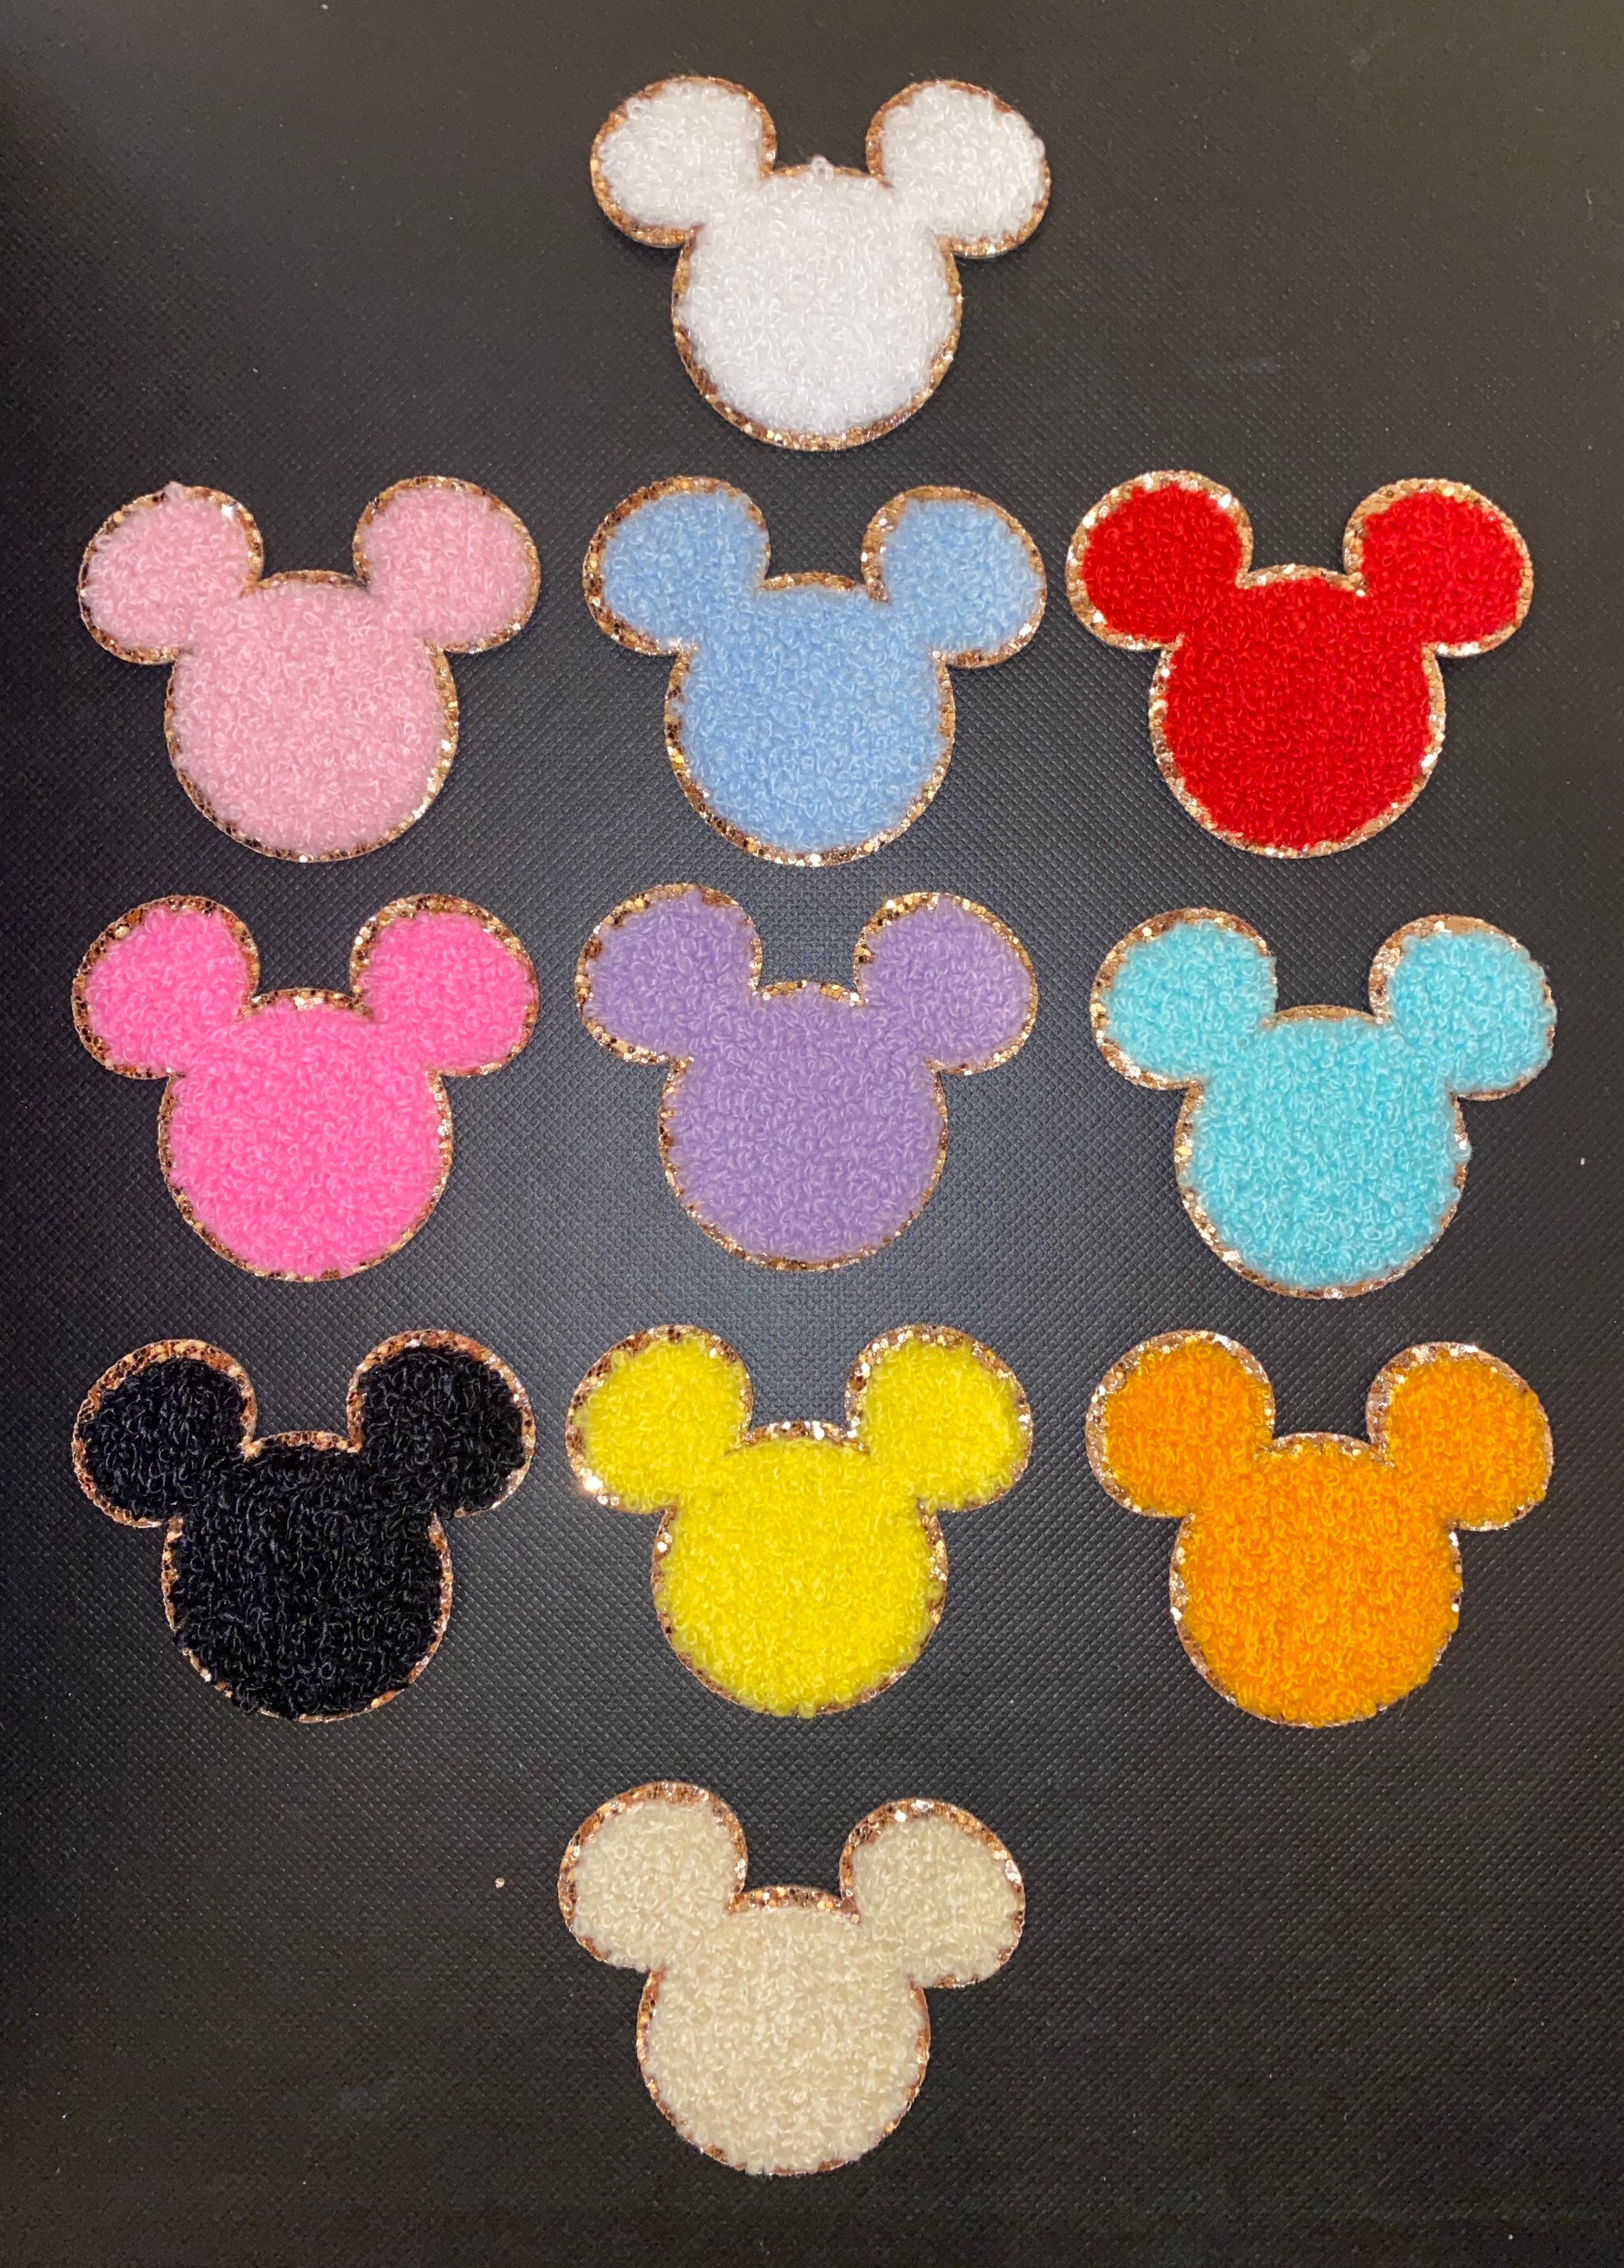 Mickey Patch, Minnie Mouse Patch, Disney Iron on Patch, Embroidery Patches  for Denim Jacket, Patches for Jeans, Patches Set, Mickey Mouse 